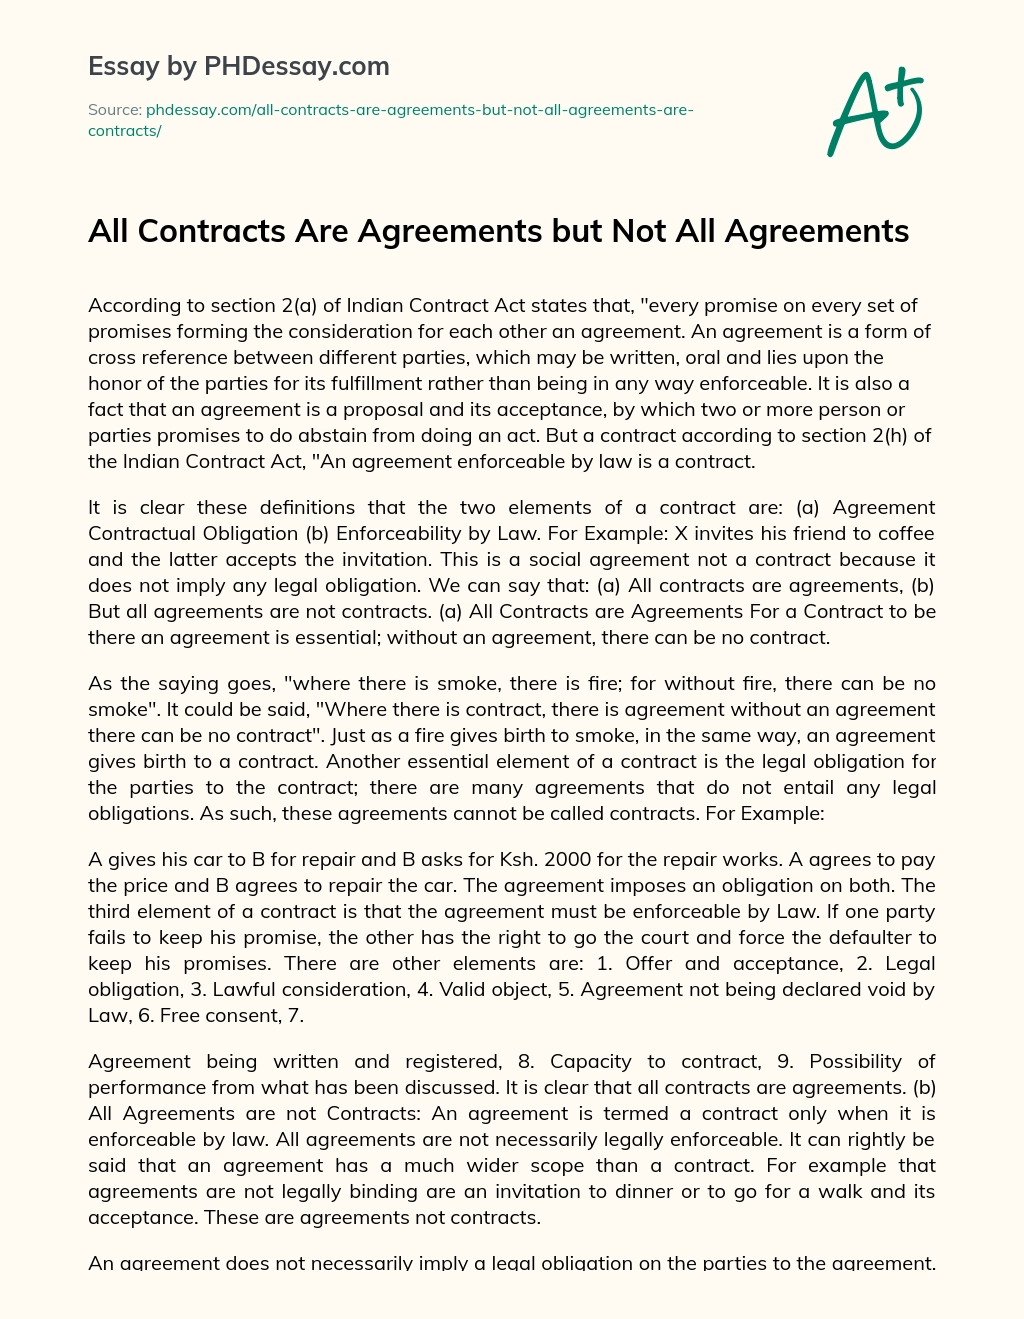 All Contracts Are Agreements but Not All Agreements essay